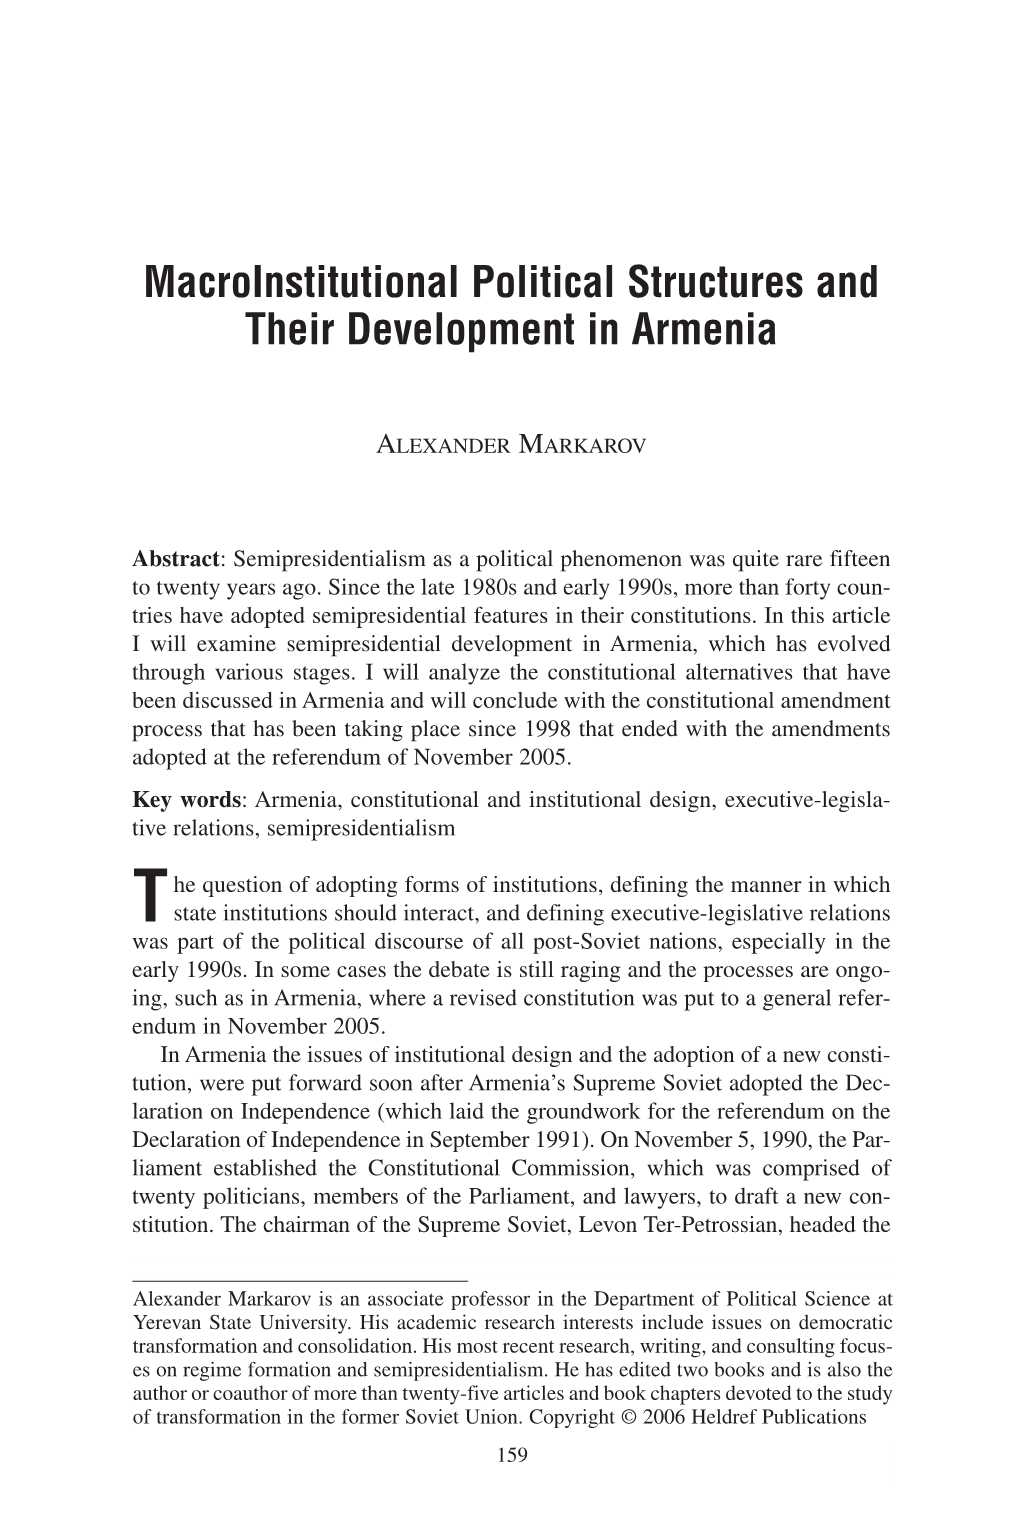 Macroinstitutional Political Structures and Their Development in Armenia